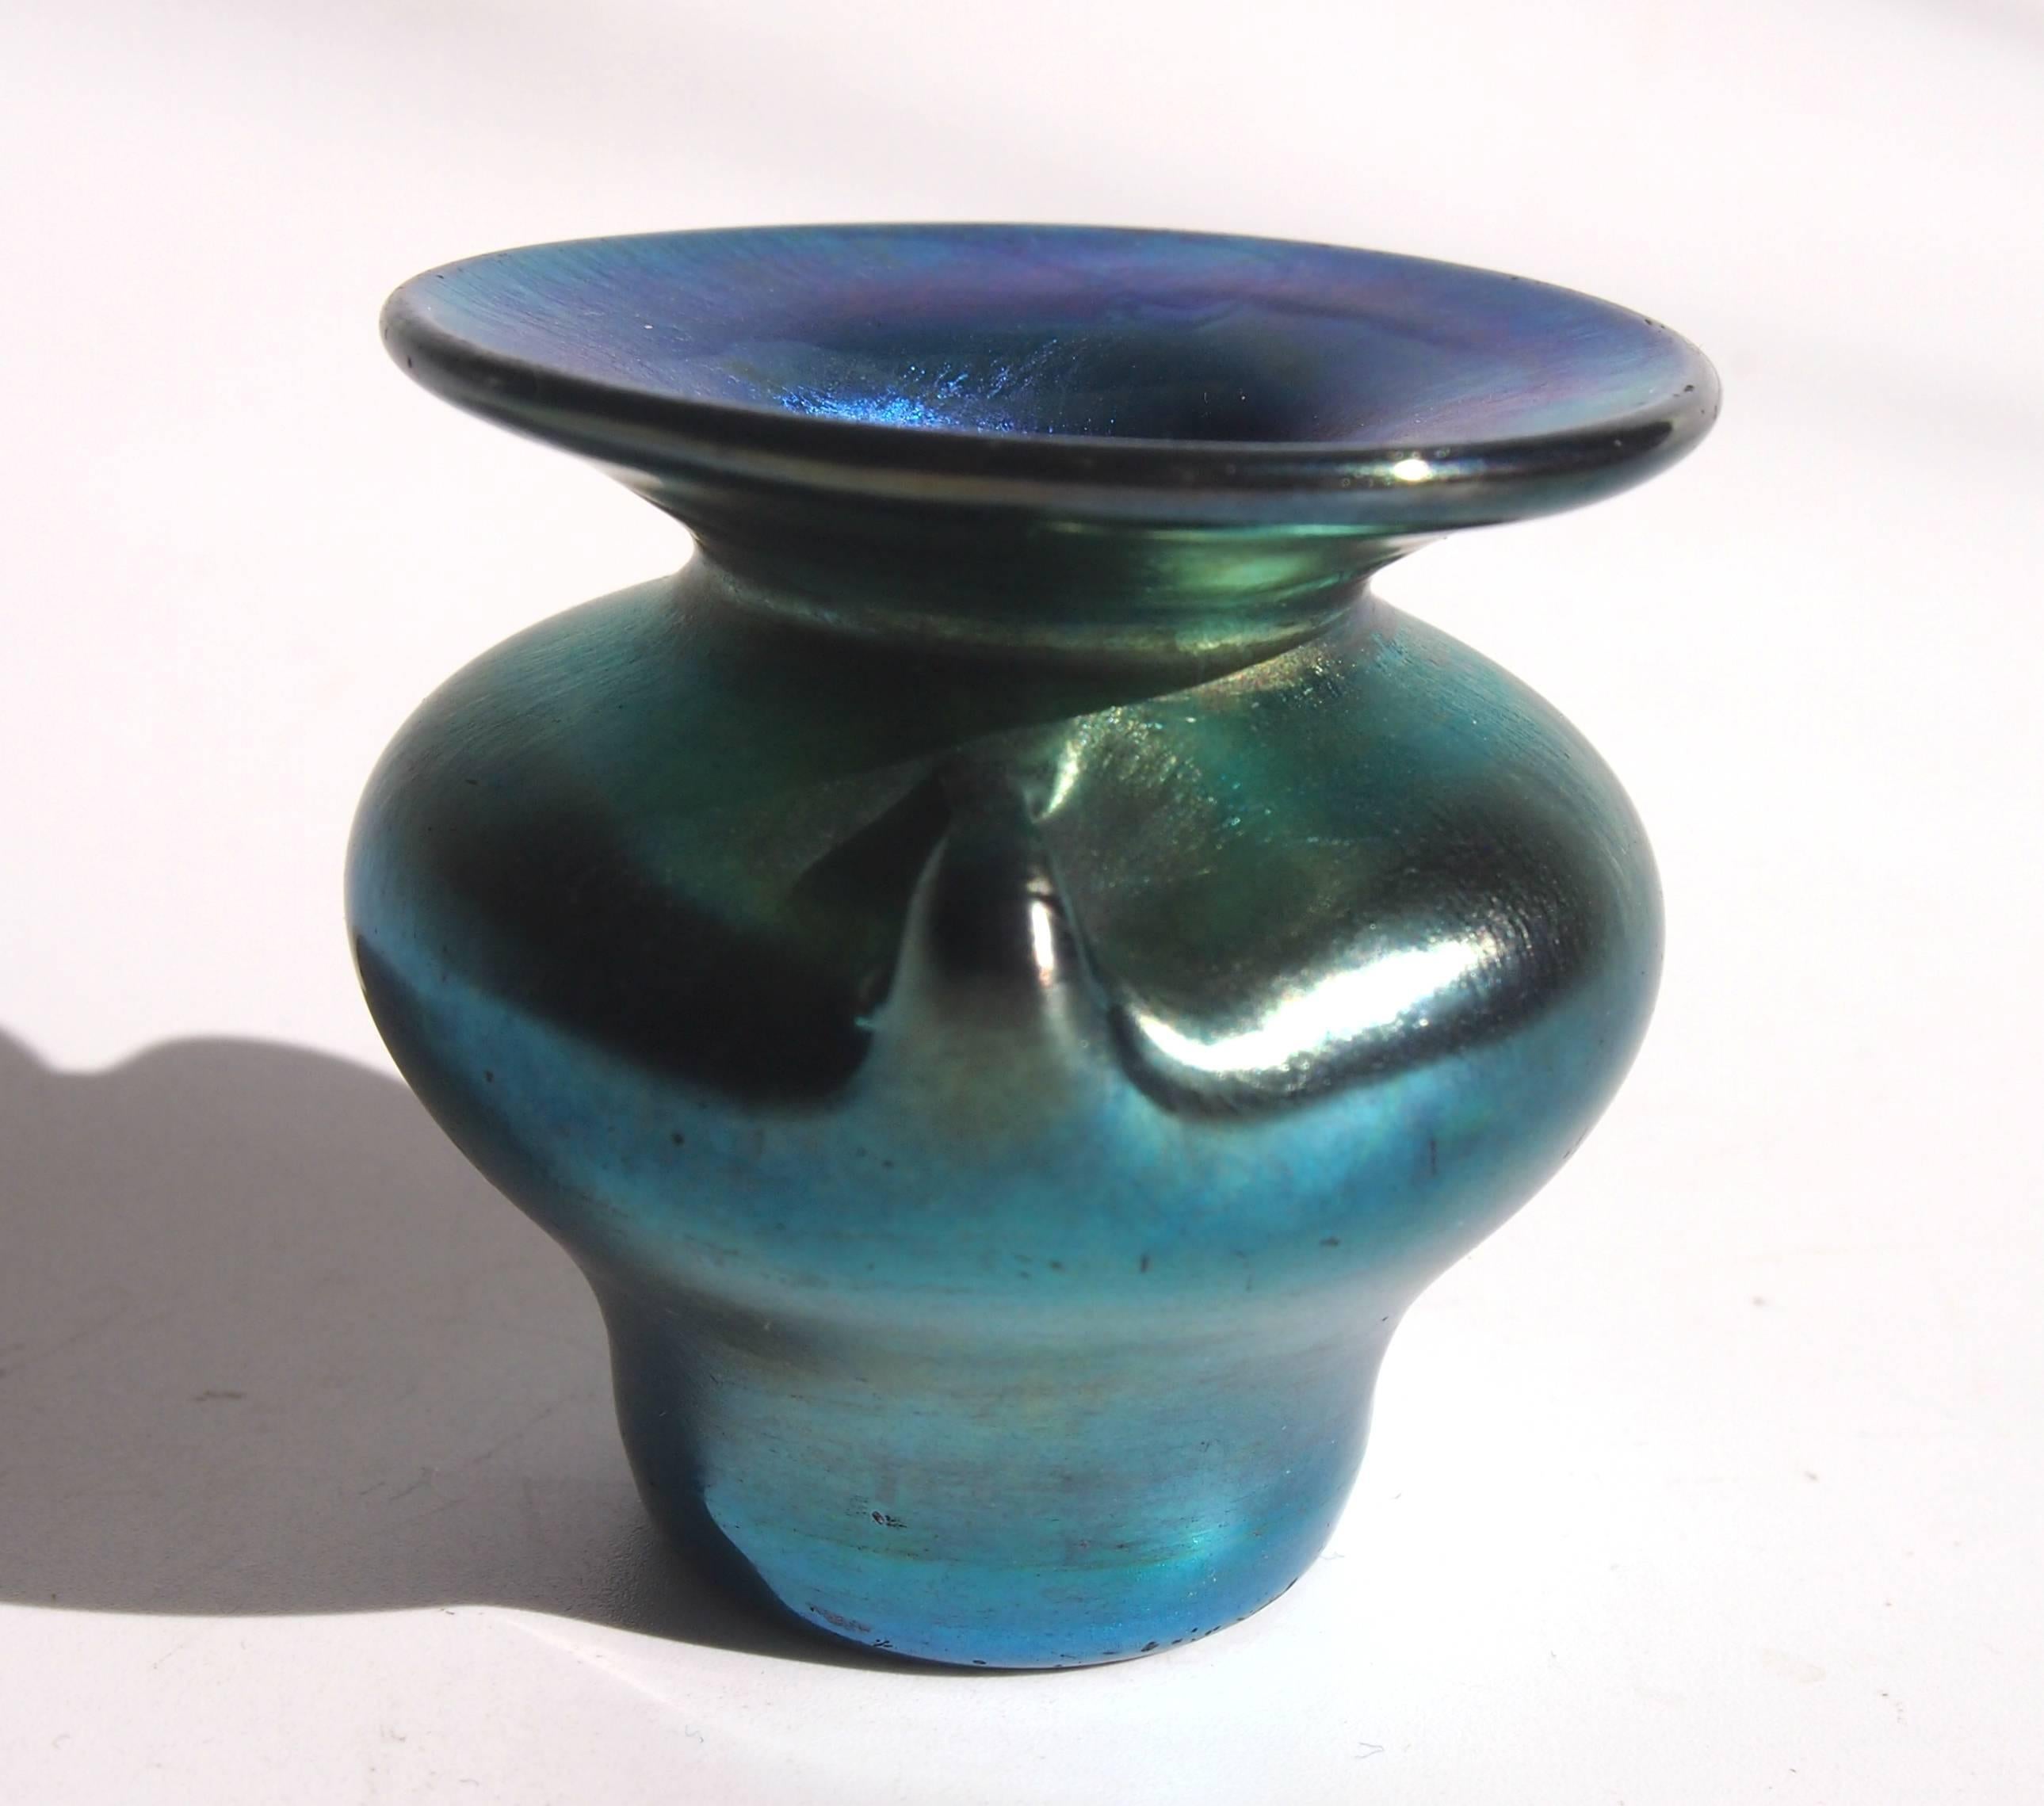 L C Tiffany Art Nouveau Blue Miniature Favrile Glass Urn/Vase In Good Condition For Sale In London, GB